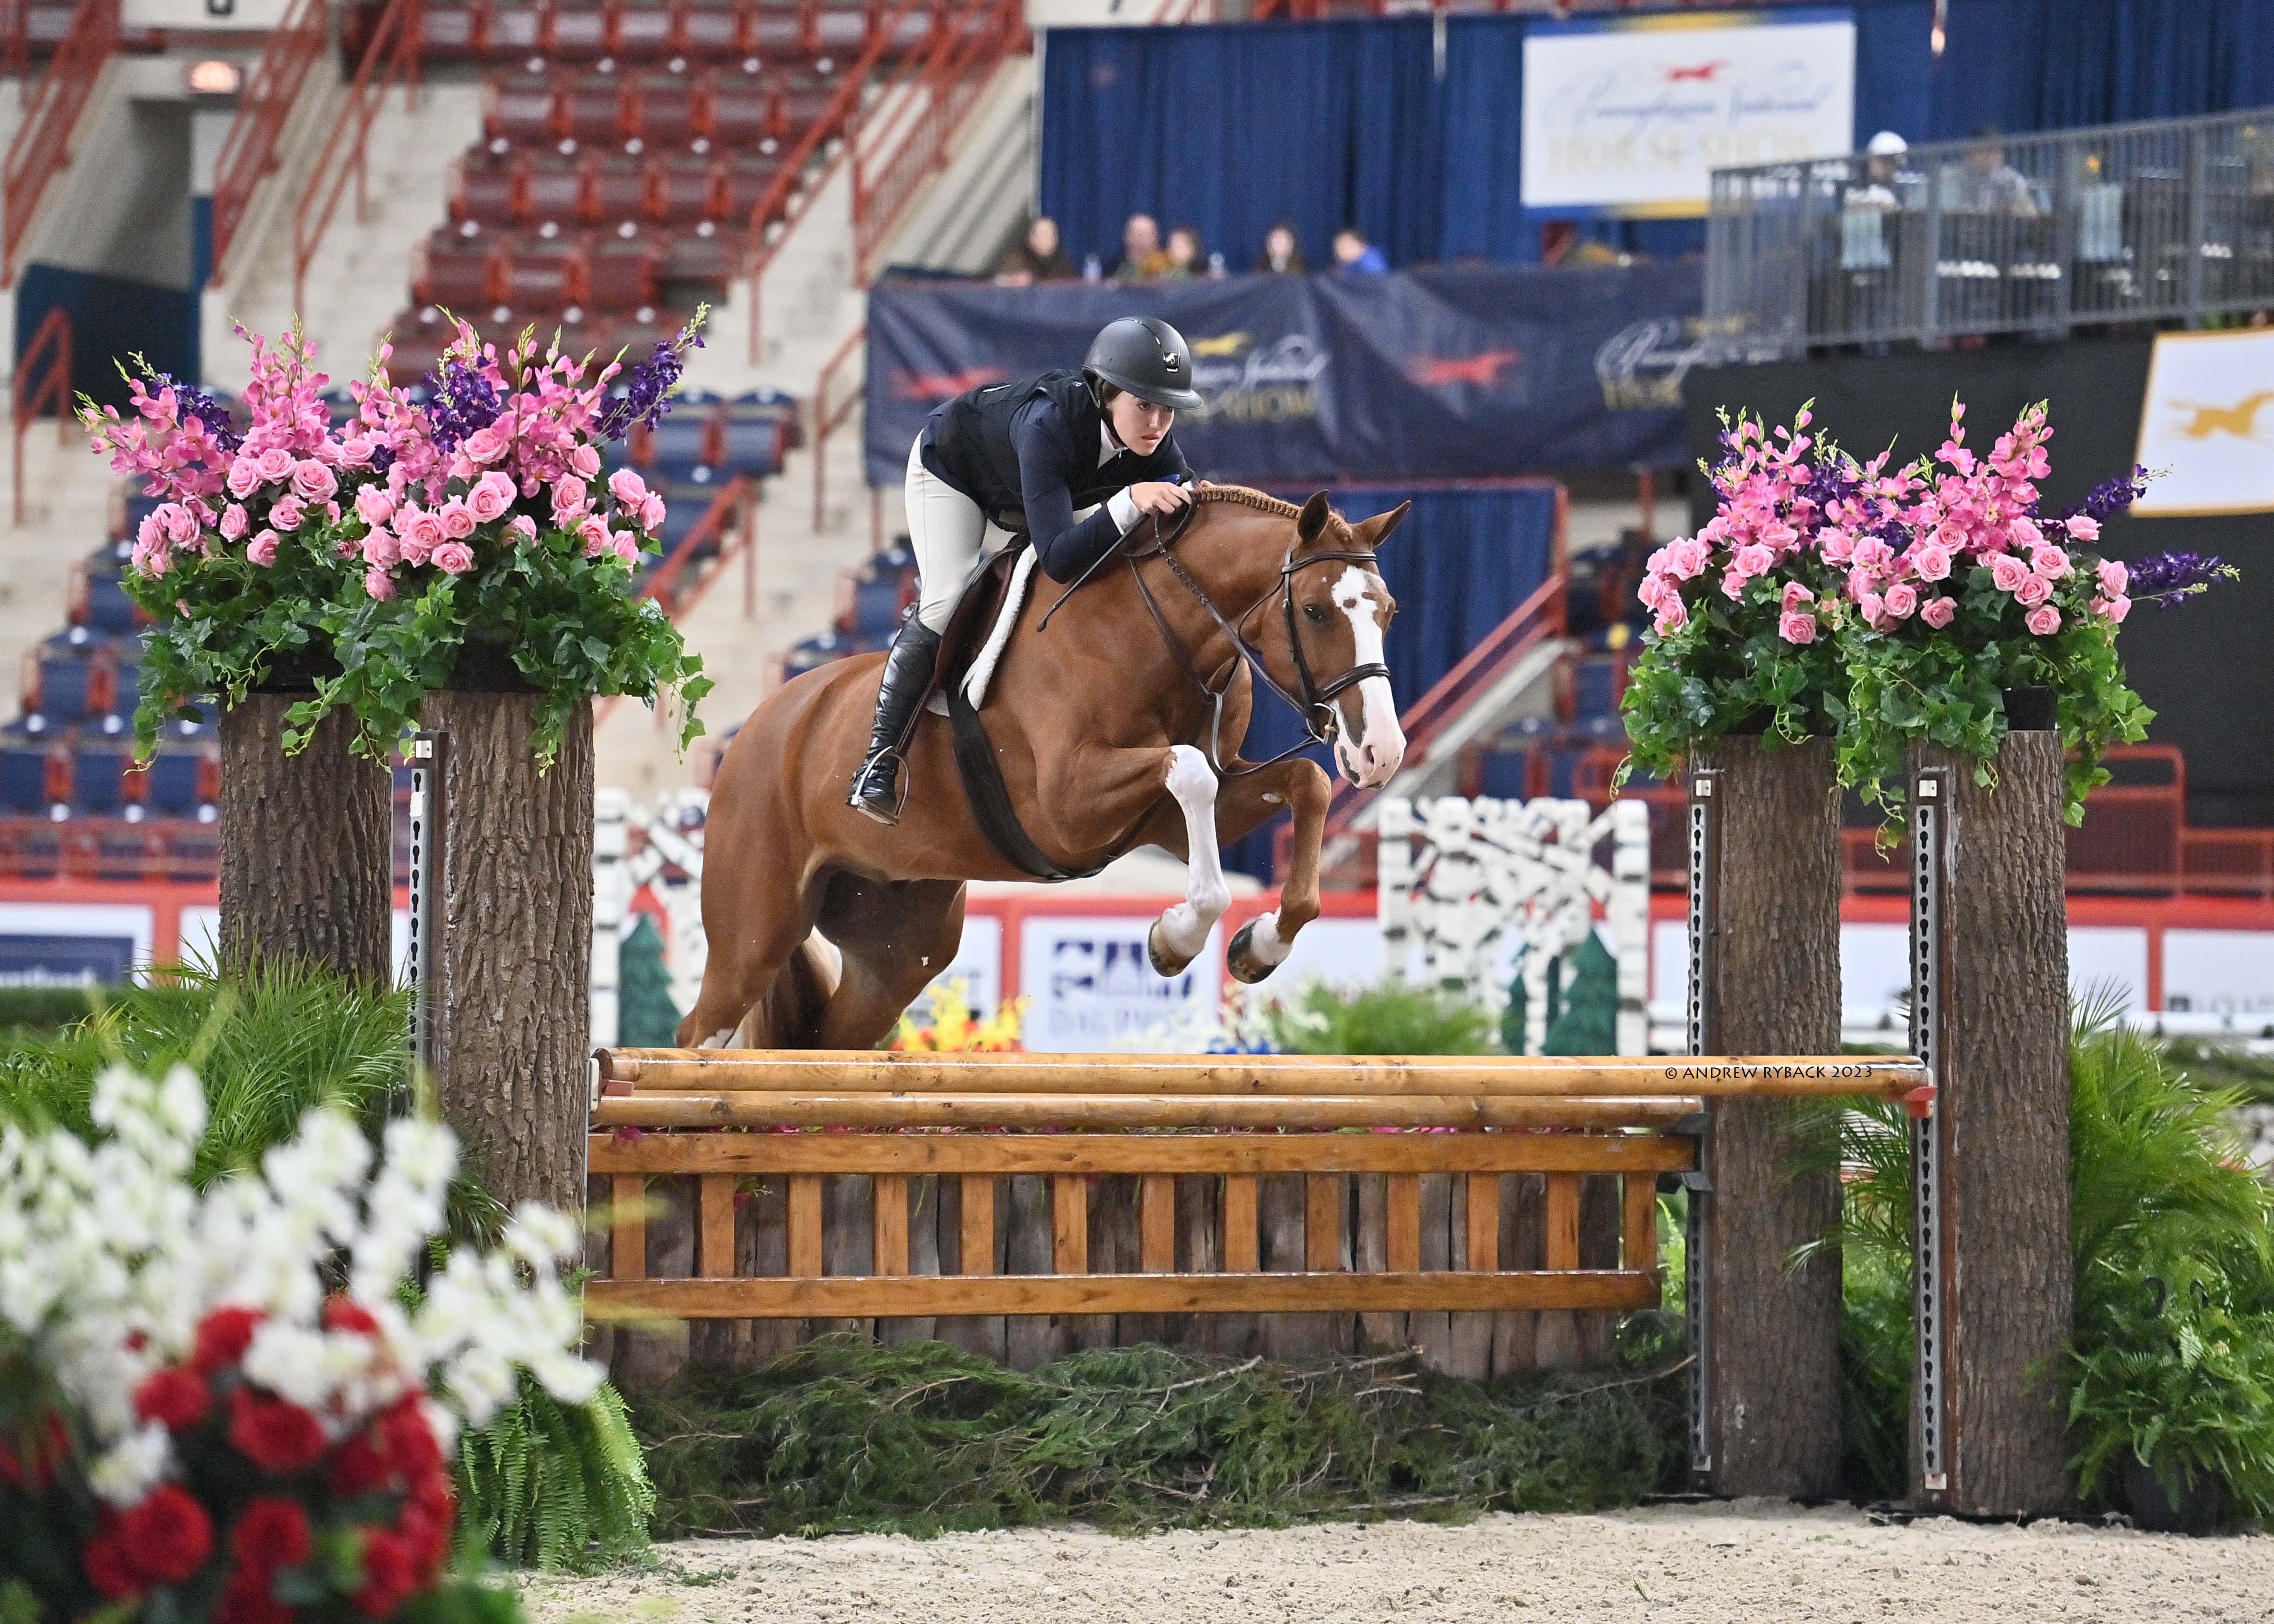 Ariana Marnell and Babylon are Best Junior Hunters at Pennsylvania National Horse Show